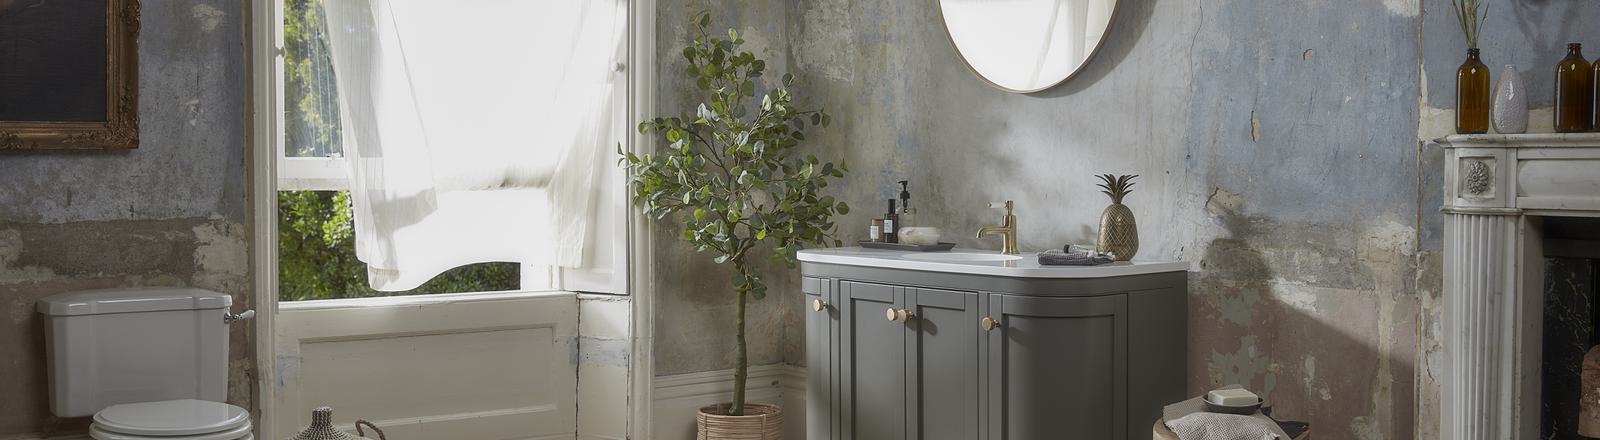 What Adds The Most Value To a Bathroom?